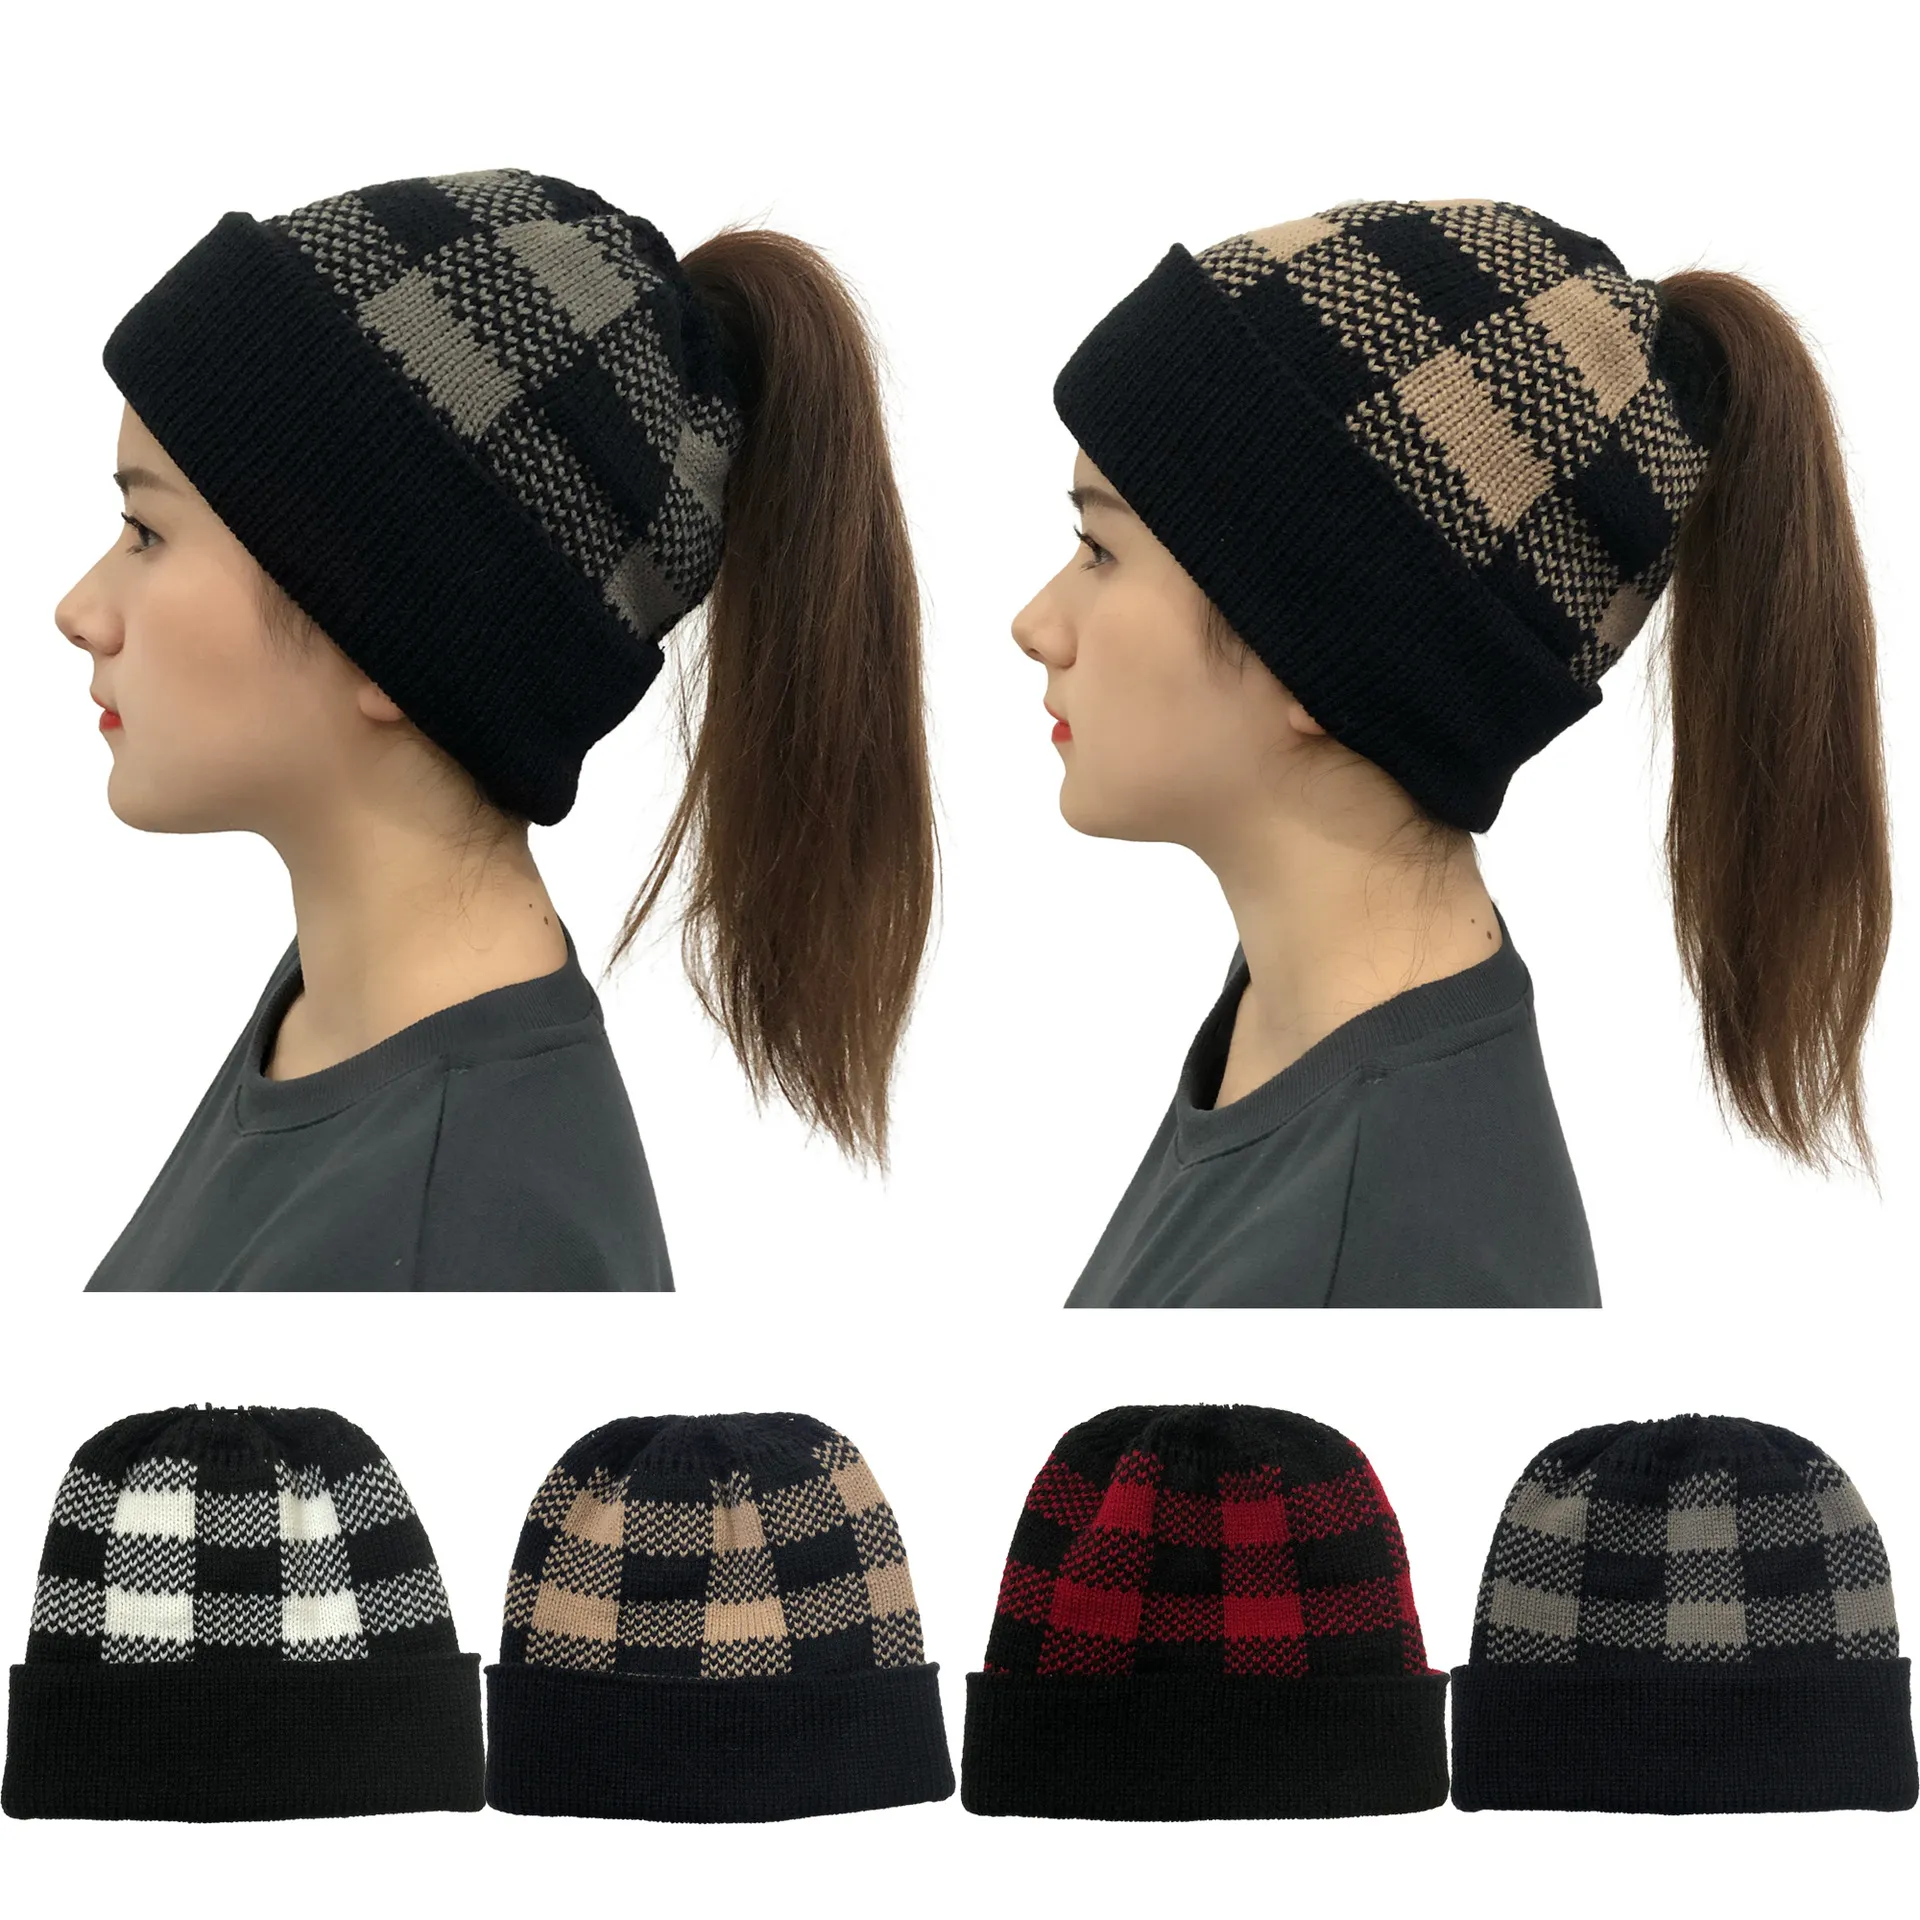 Woman Plaid Wool Hat Adult Lady Winter Warm Ponytail Beanies Knitted Hats 4 Colors Home Fashion Casual Ponytail Hat